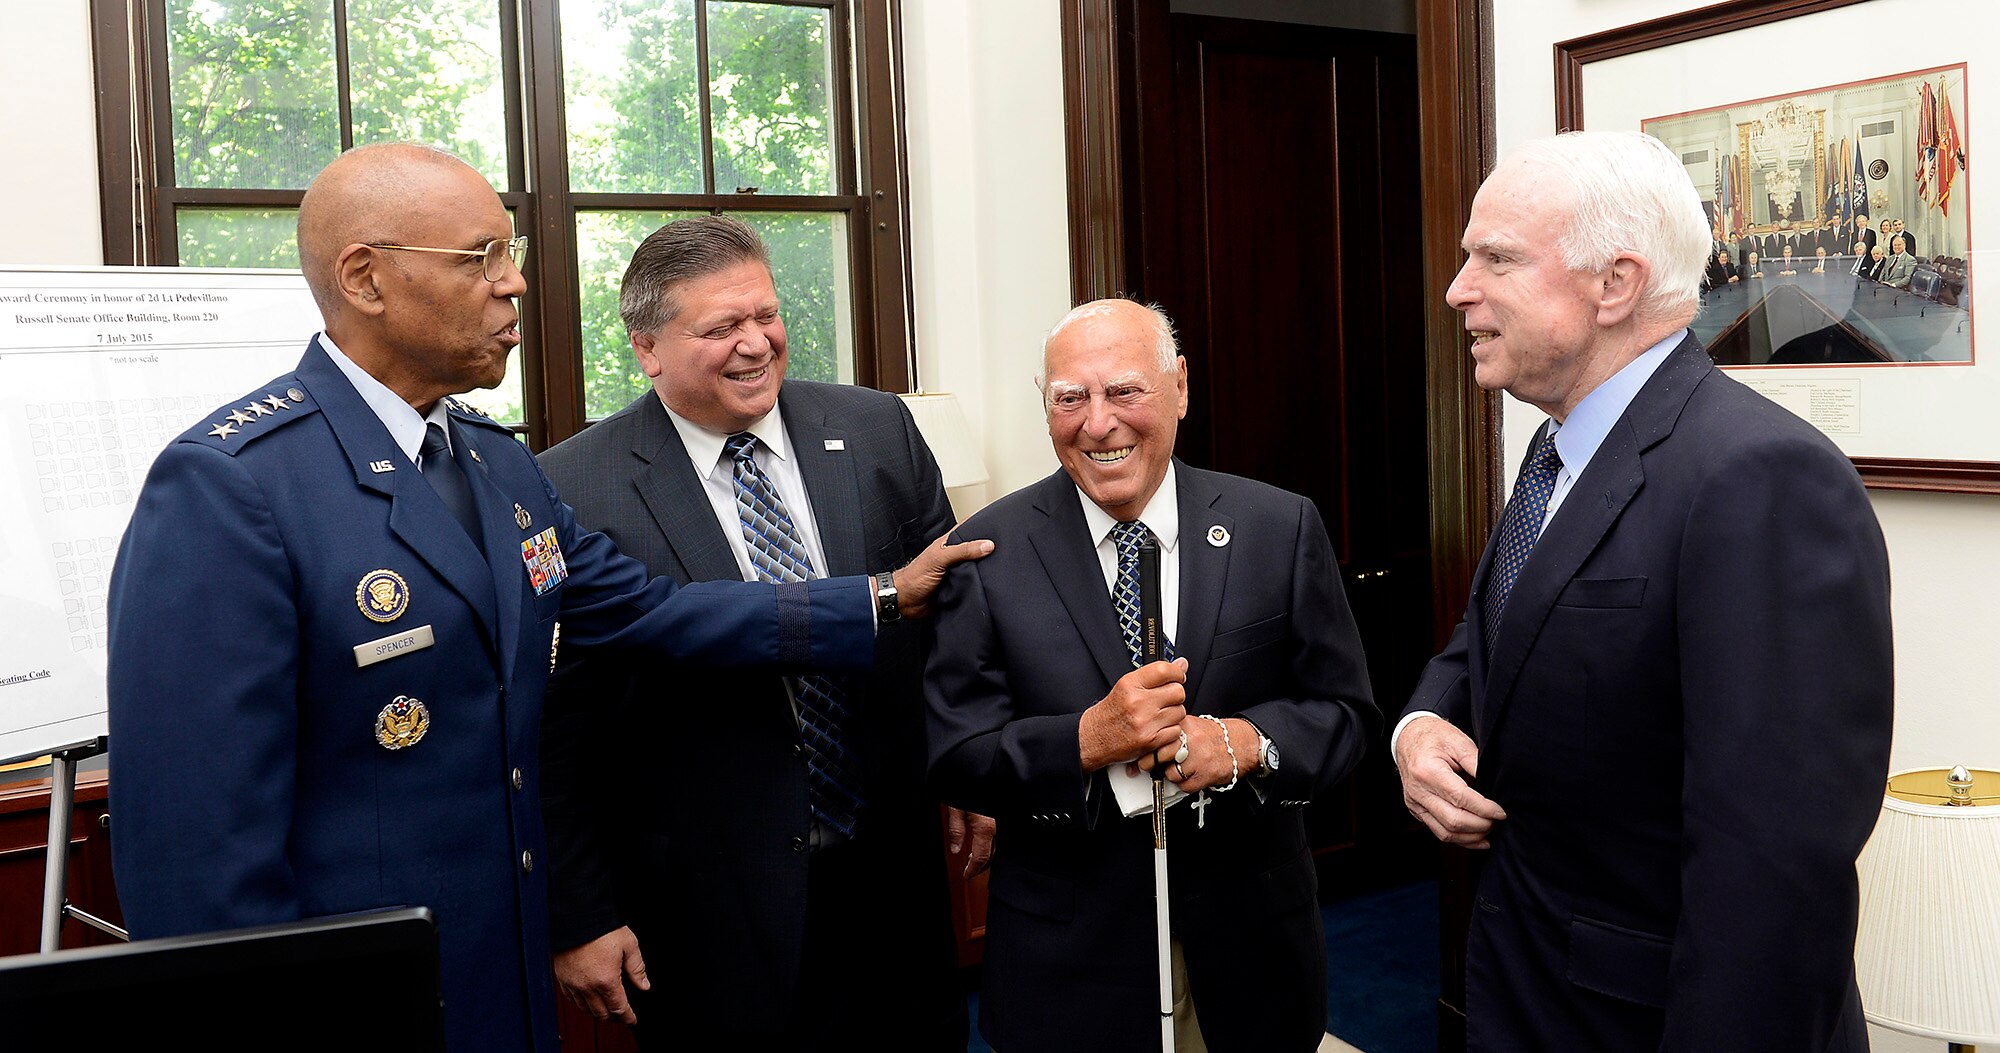 Air Force Vice Chief of Staff Gen. Larry O. Spencer meets with 2nd Lt. John Pedevillano, third from left, a WWII Army Air Corps B-17 bombardier, with his son-in-law William Lucci, and Sen. John McCain, in Washington, D.C., July 7, 2015. Spencer and McCain presented Pedevillano with the Presidential Unit Citation with one oak leaf cluster. He is the last survivor of his WWII unit. (U.S. Air Force photo/Scott M. Ash)